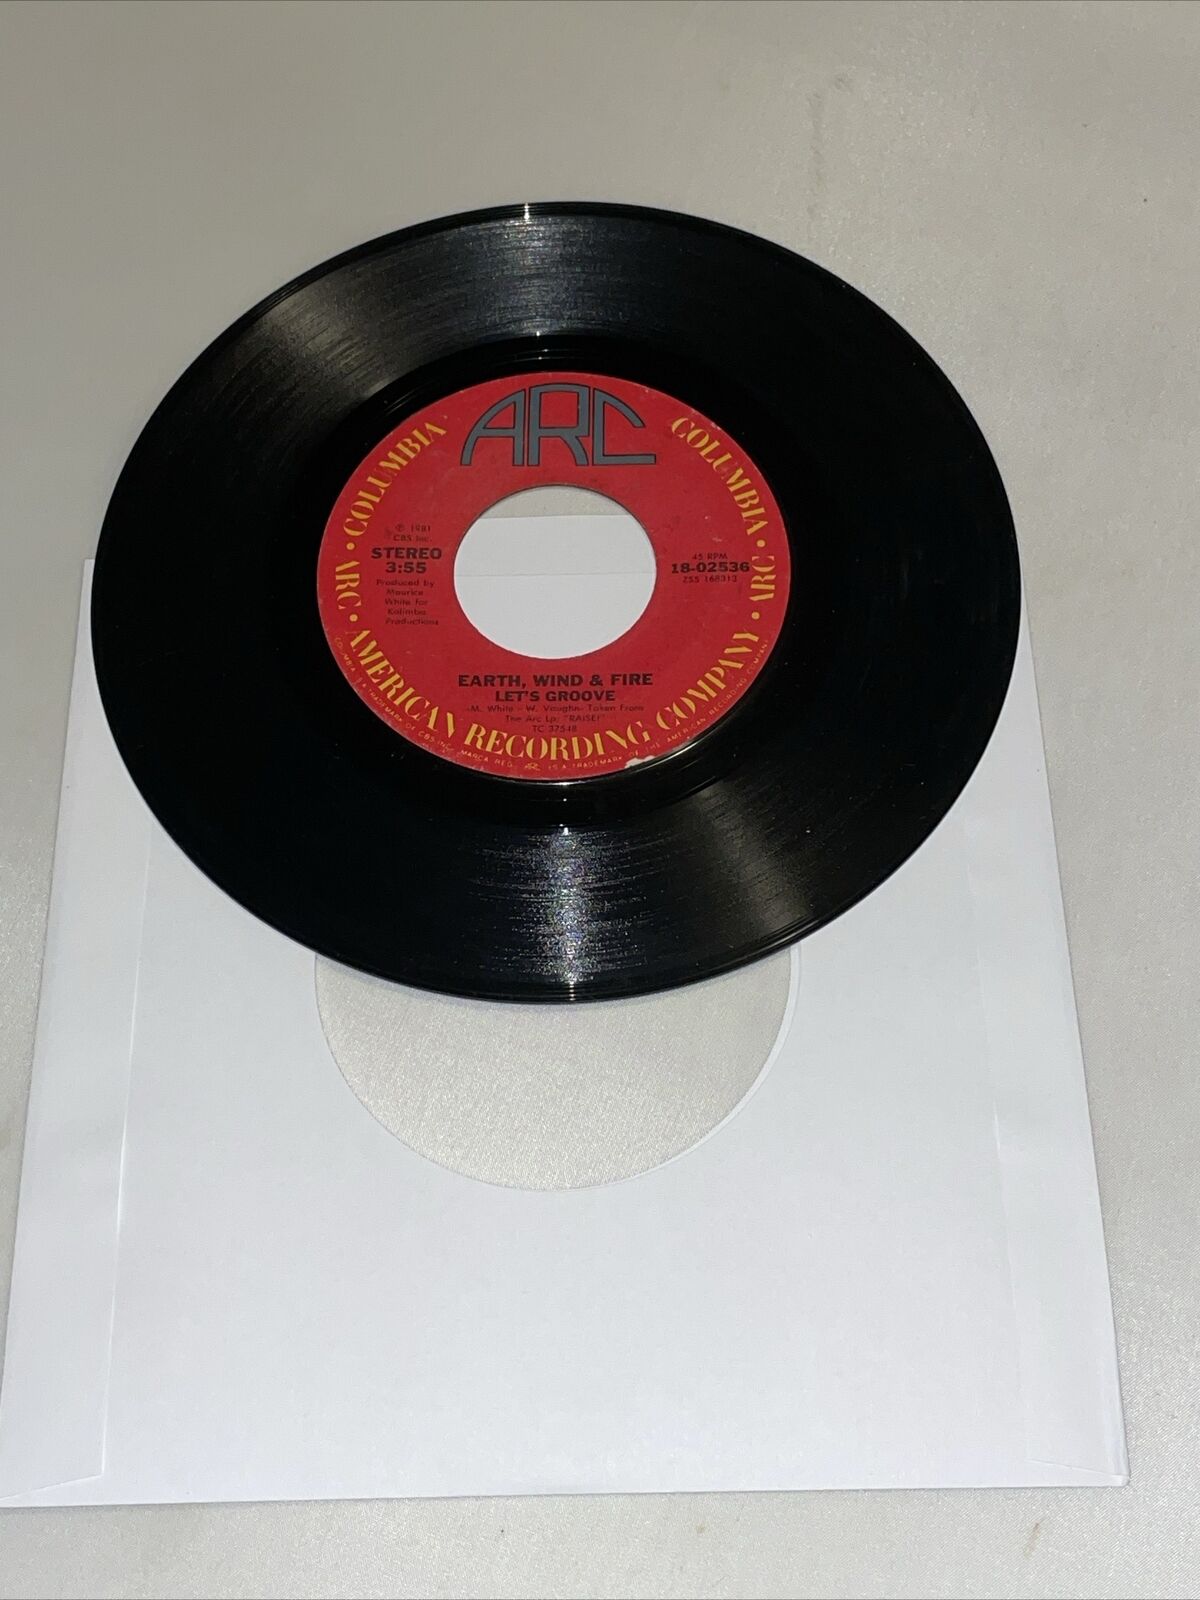 Earth, Wind & Fire - Let's Groove  & Instrumental Version ~ 1981 45 RPM 7”